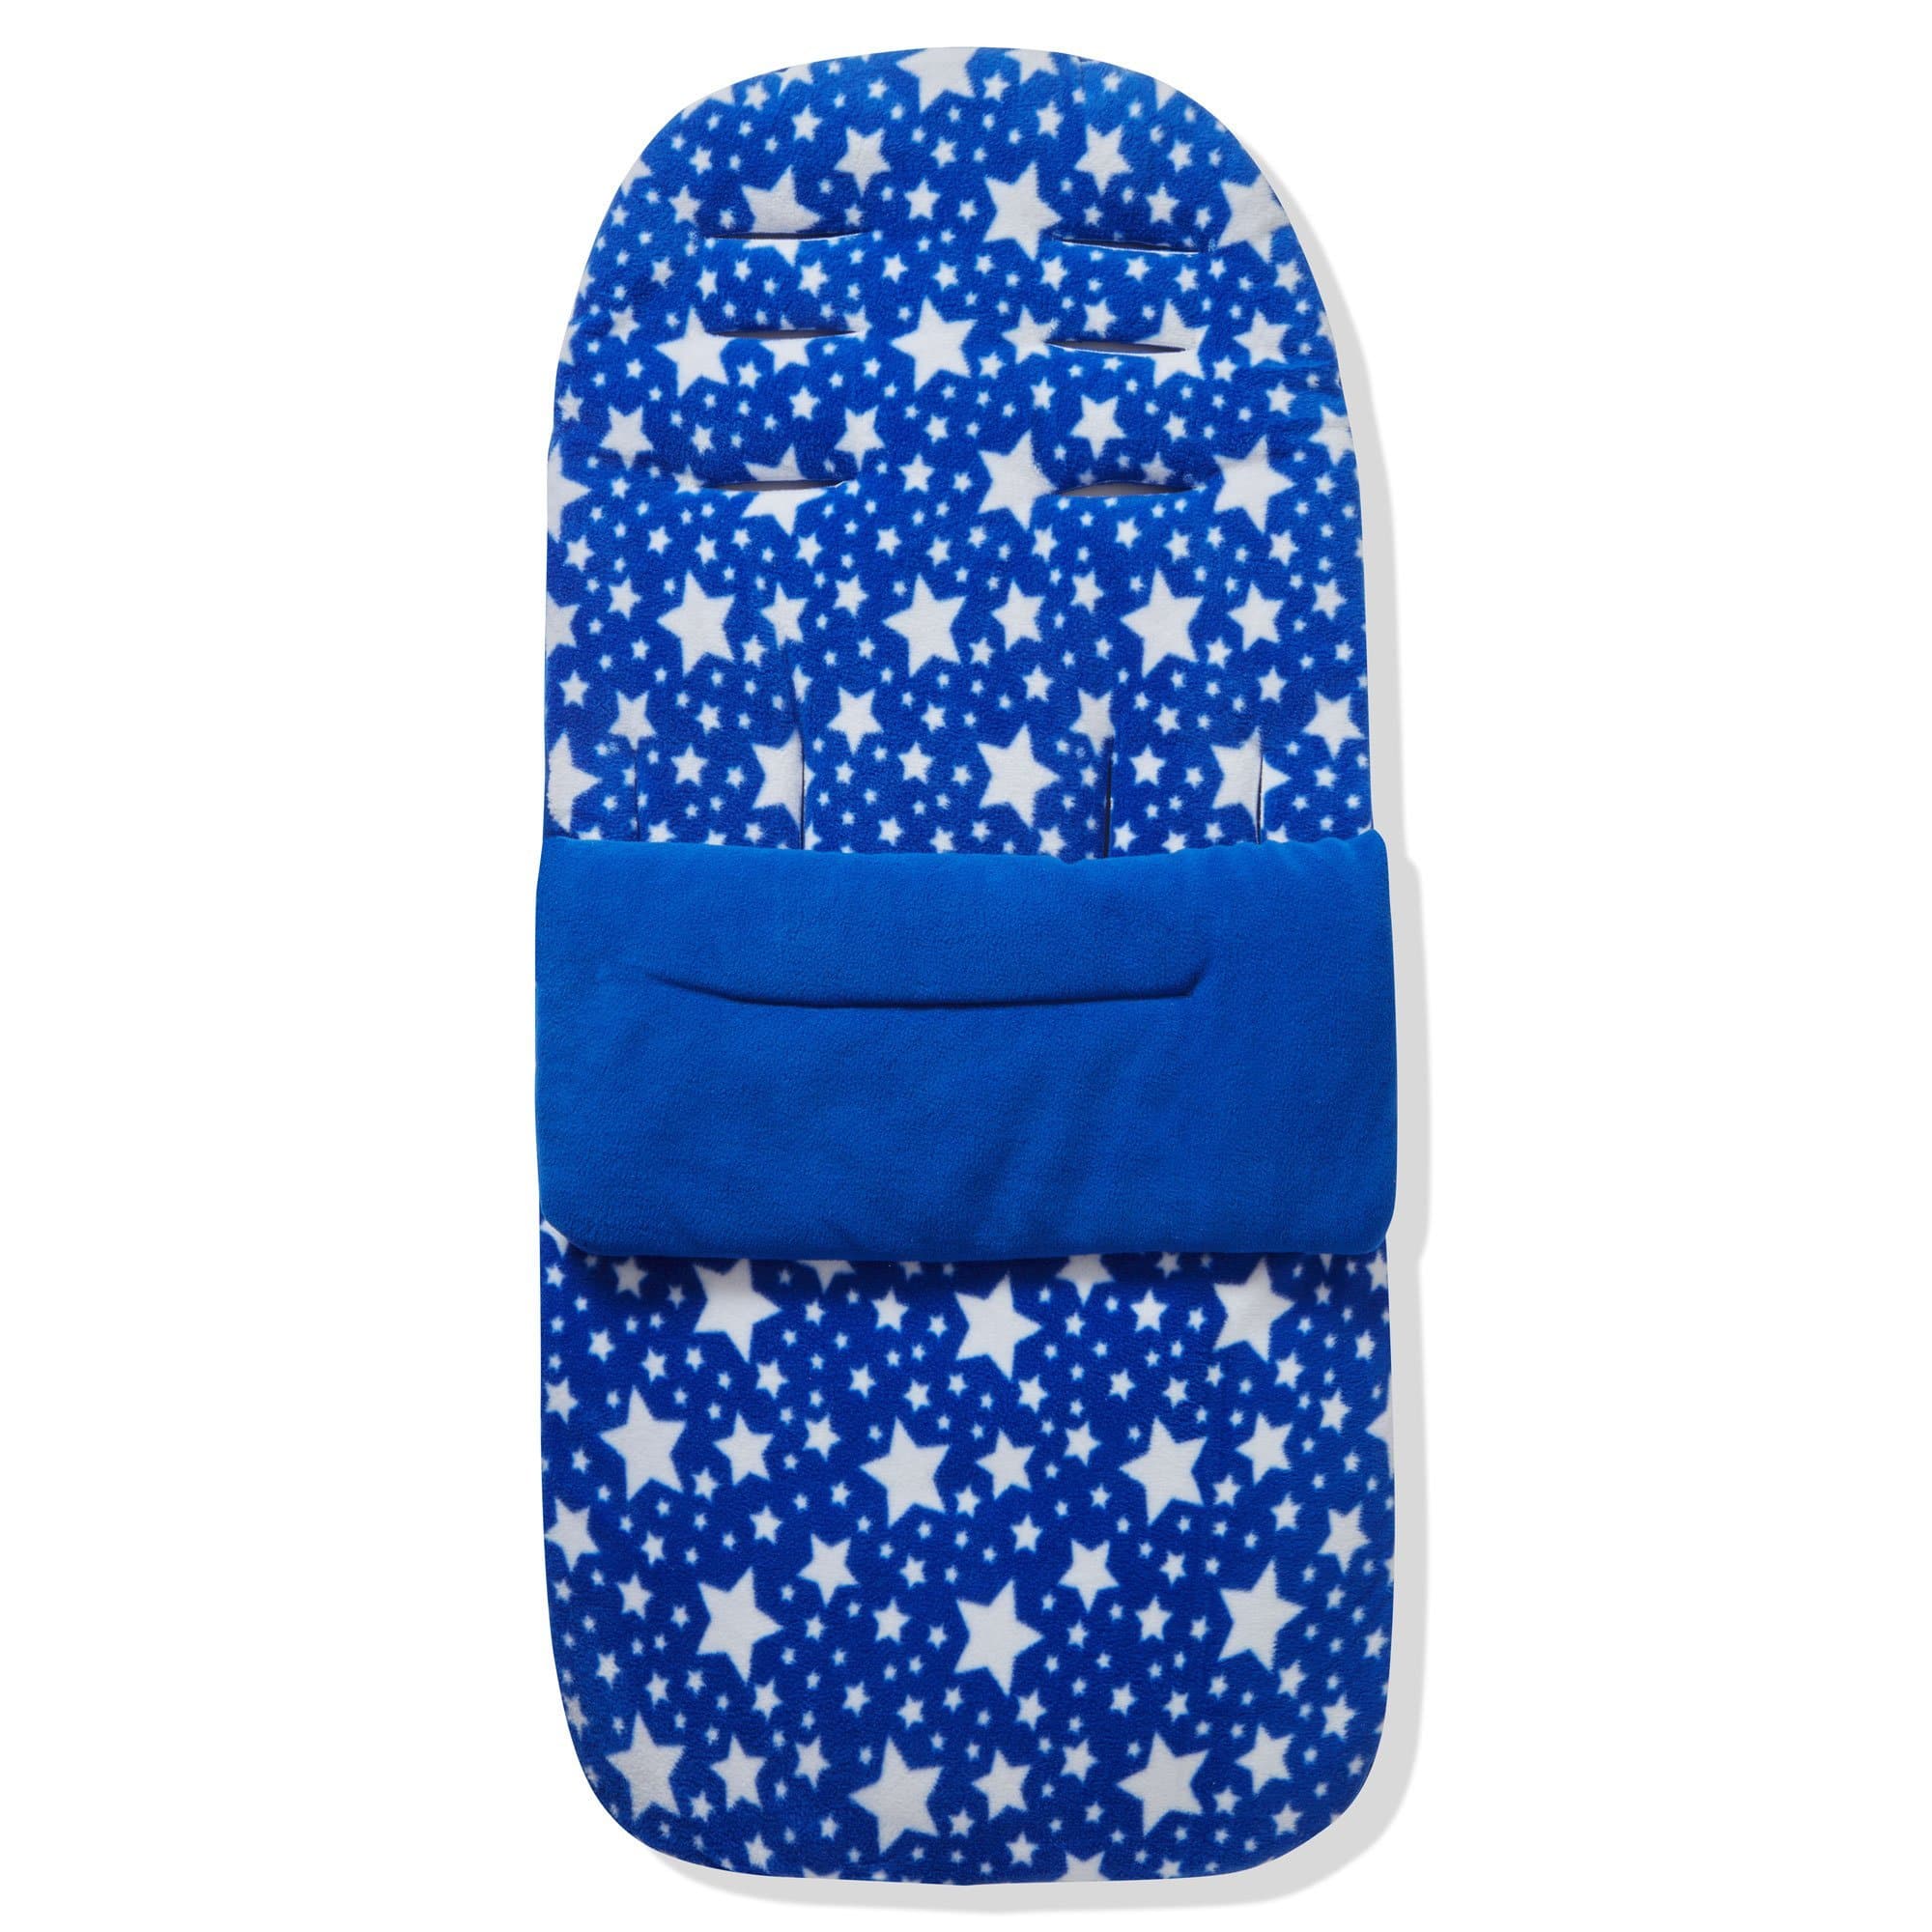 Fleece Footmuff / Cosy Toes Compatible With Bloom - Blue Star / Fits All Models | For Your Little One